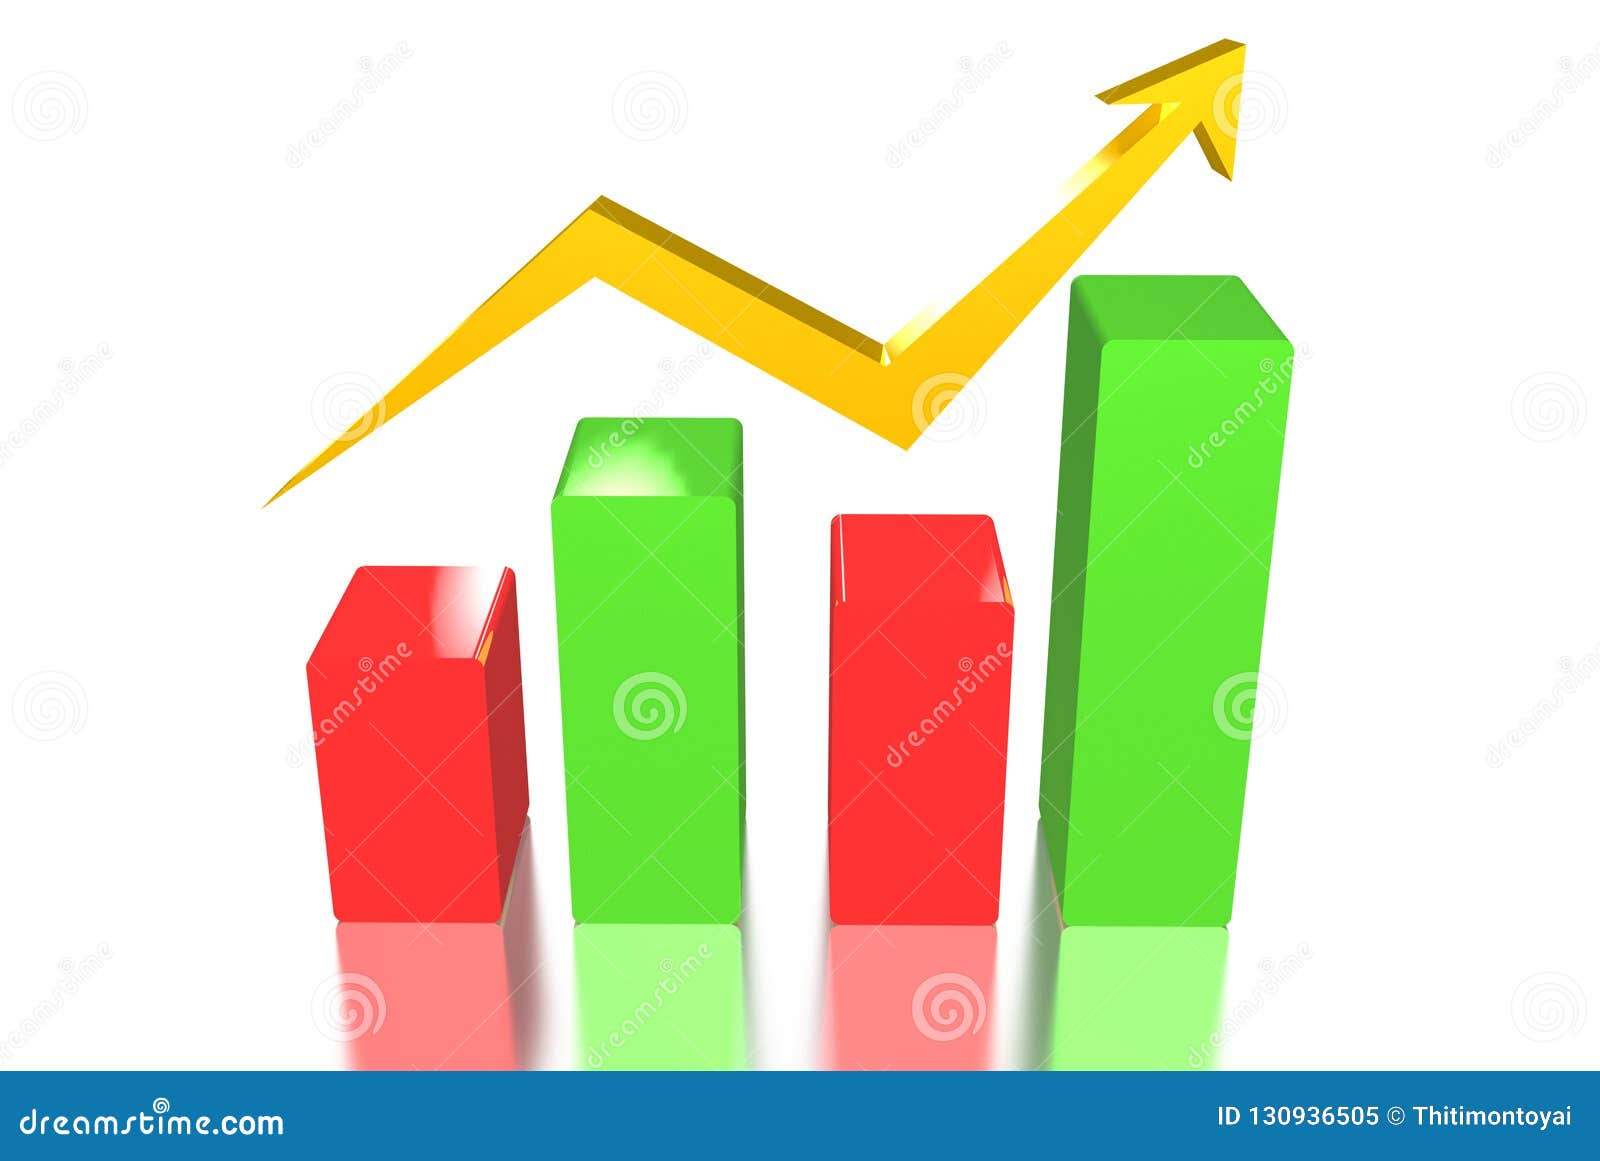 Graph Showing Up And Down Of Stock Price Stock Illustration Illustration Of Modern Arrow